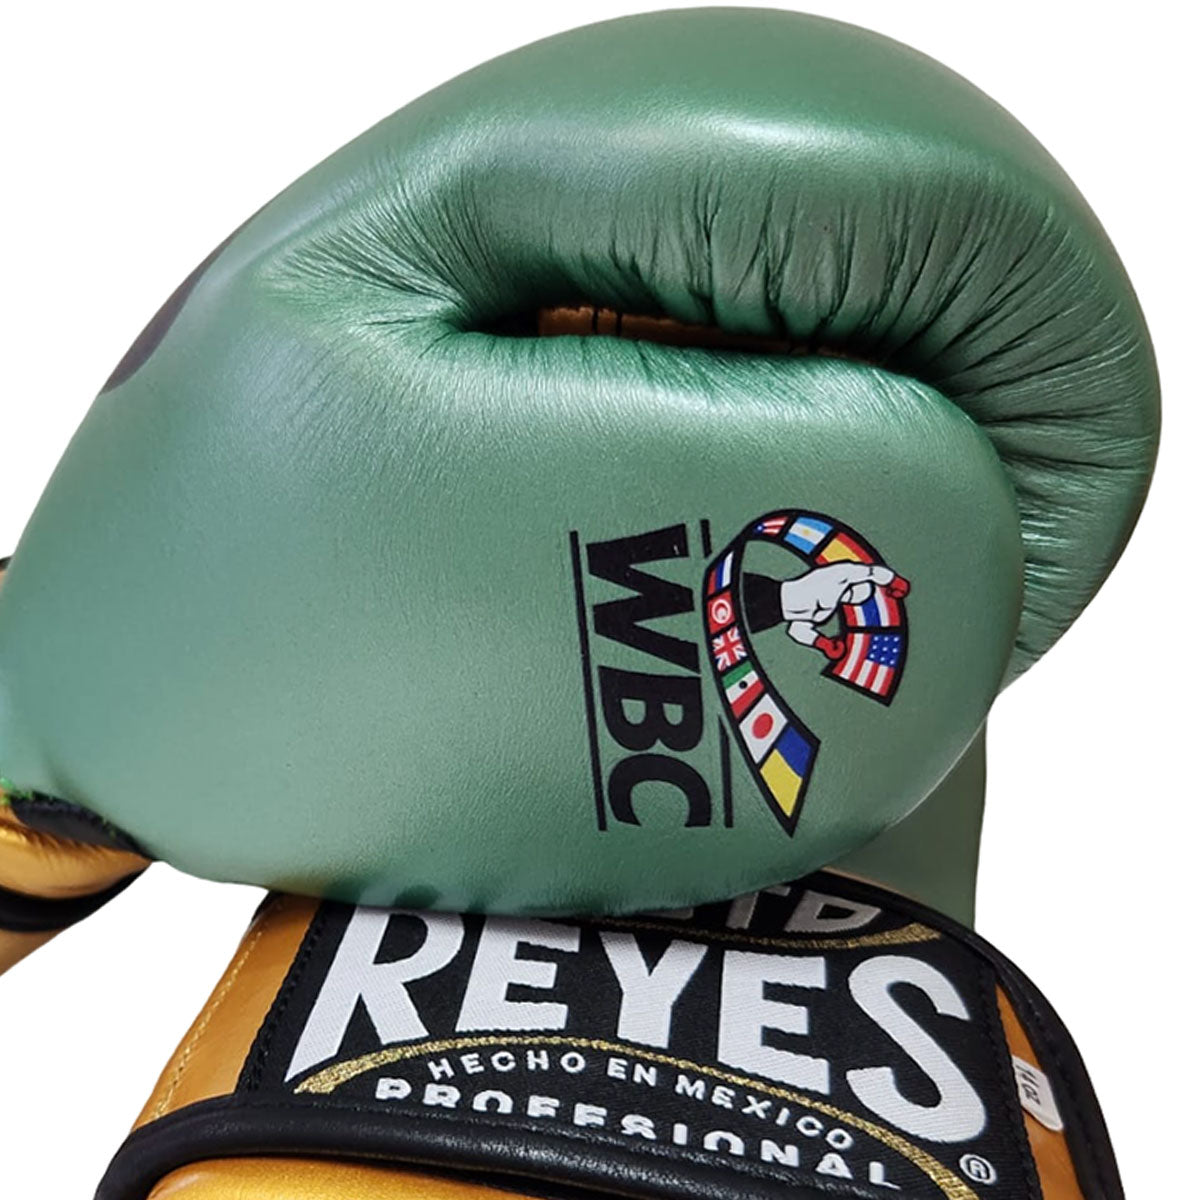 Cleto Reyes Professional Boxing Gloves - WBC Edition - Cleto Reyes Boxing  Official